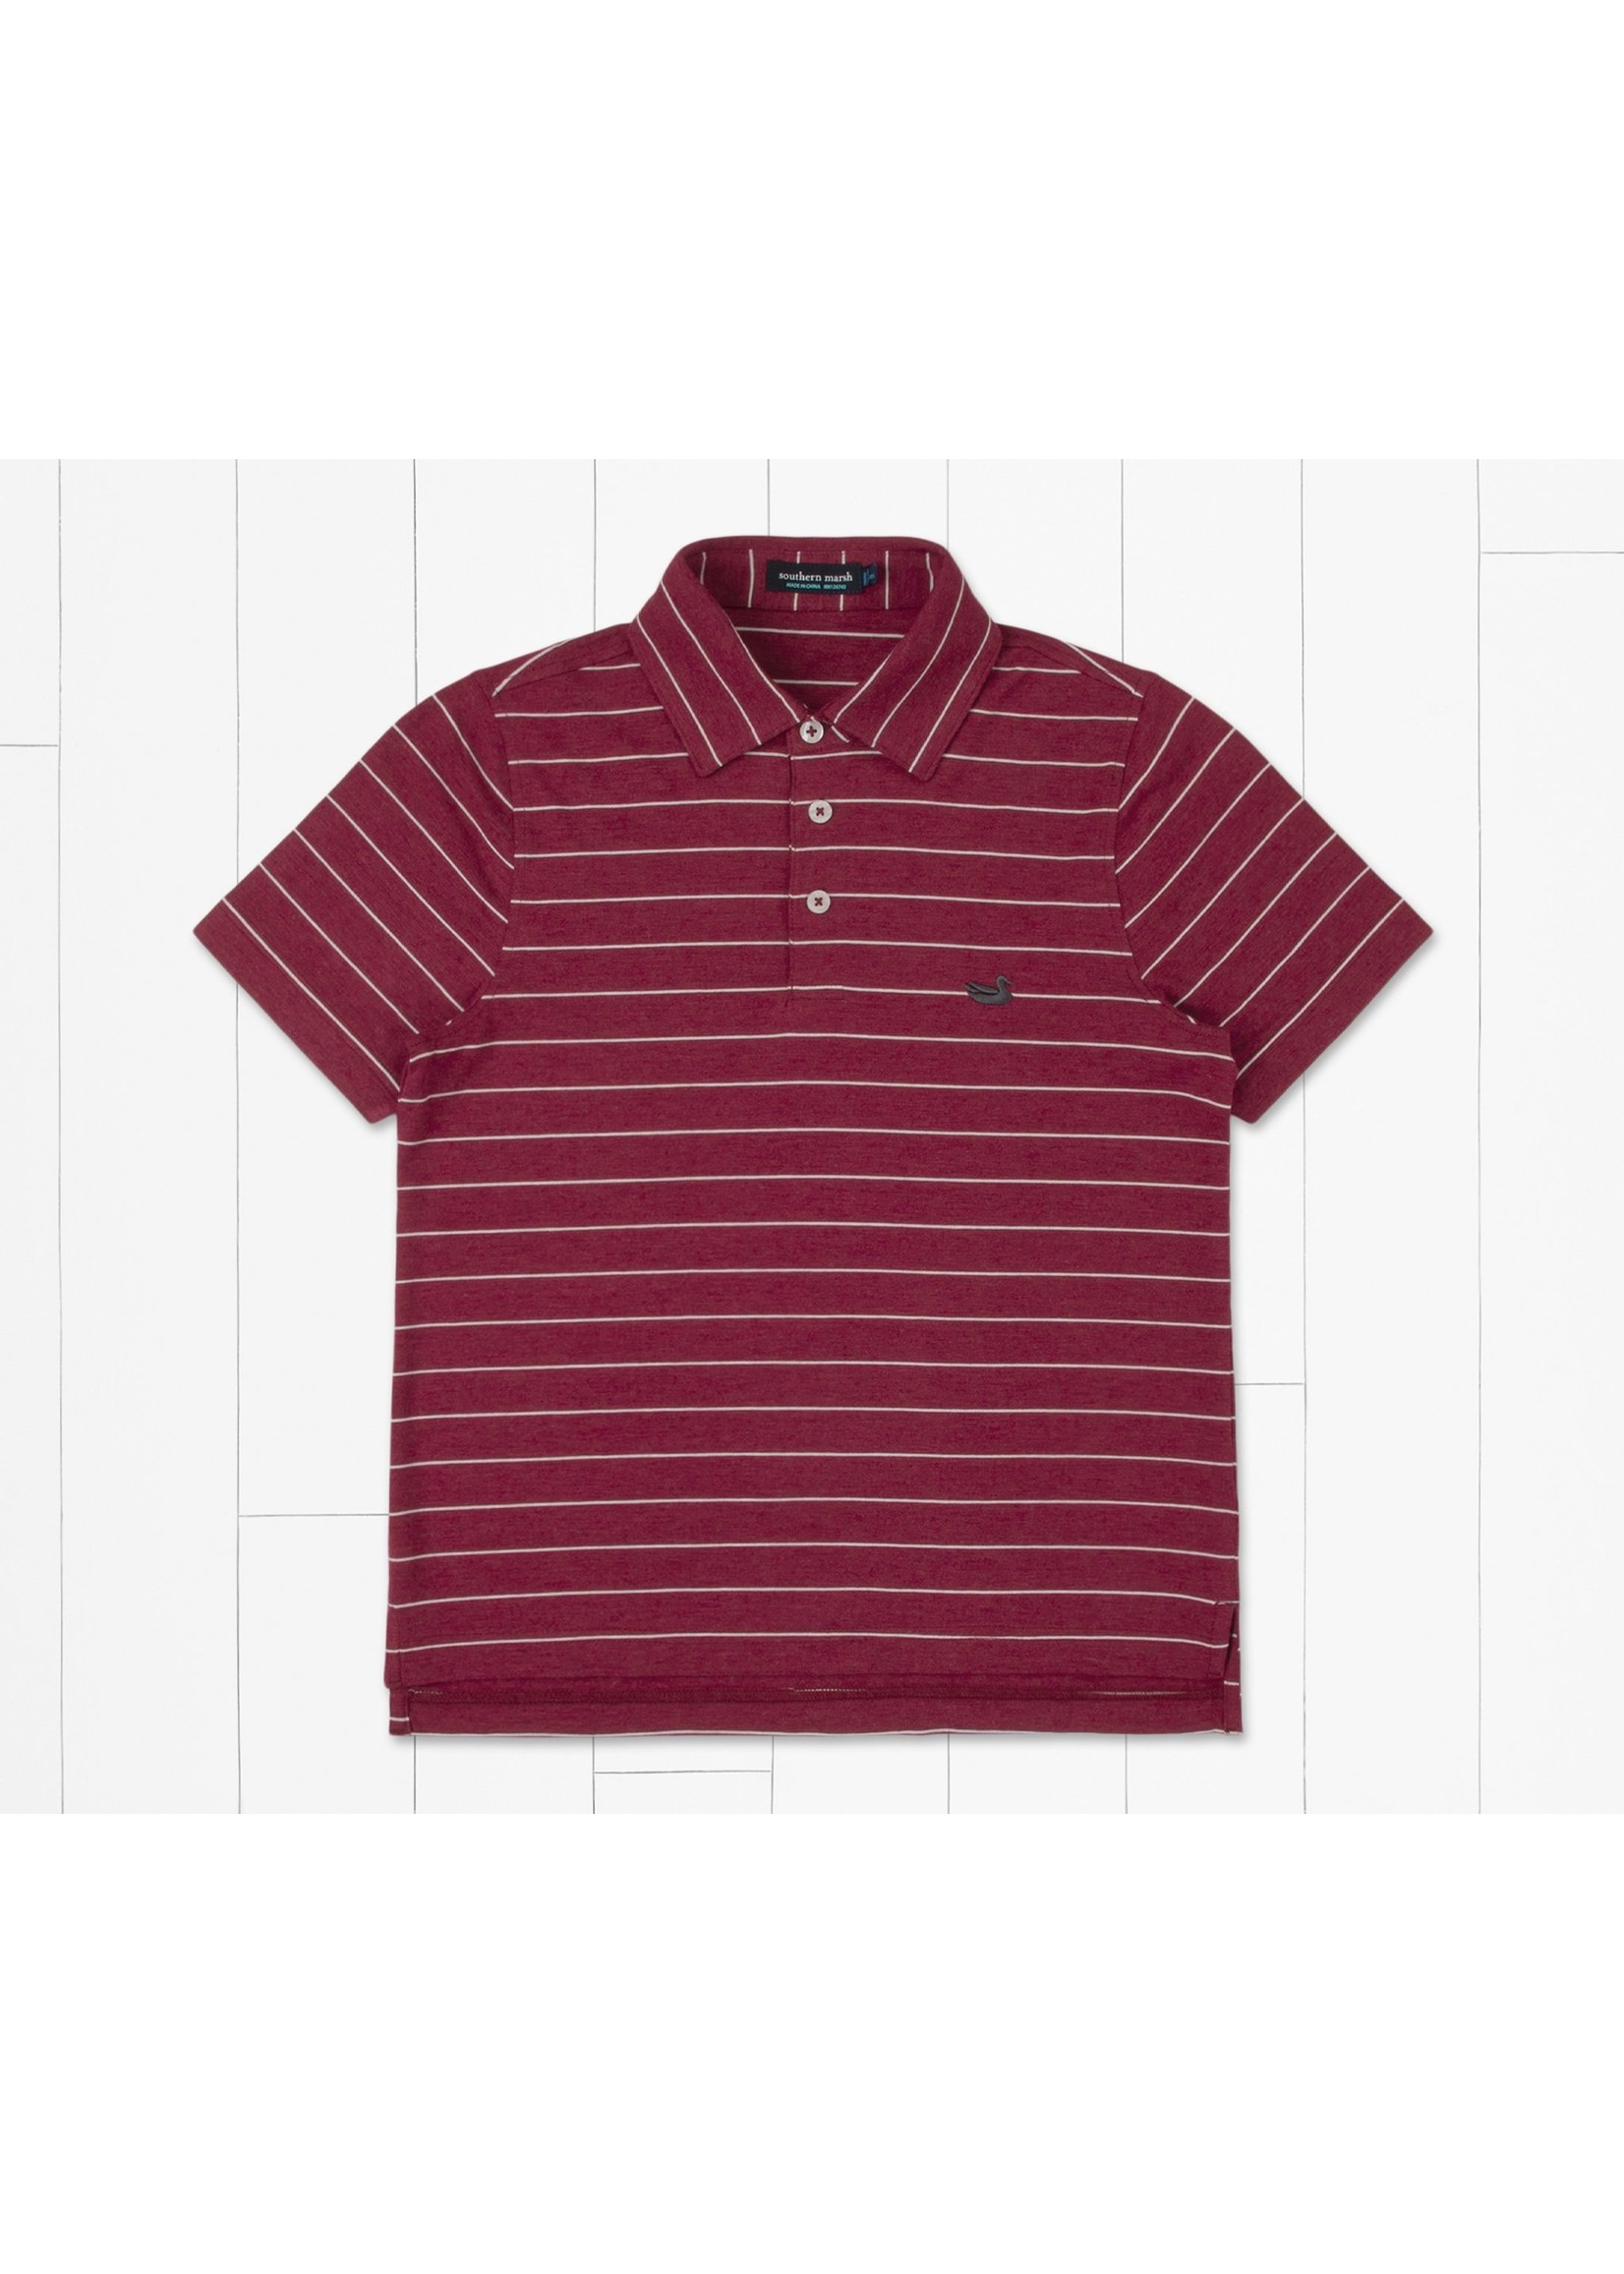 Southern Marsh Youth MarshLUX Bartlett Performance Polo